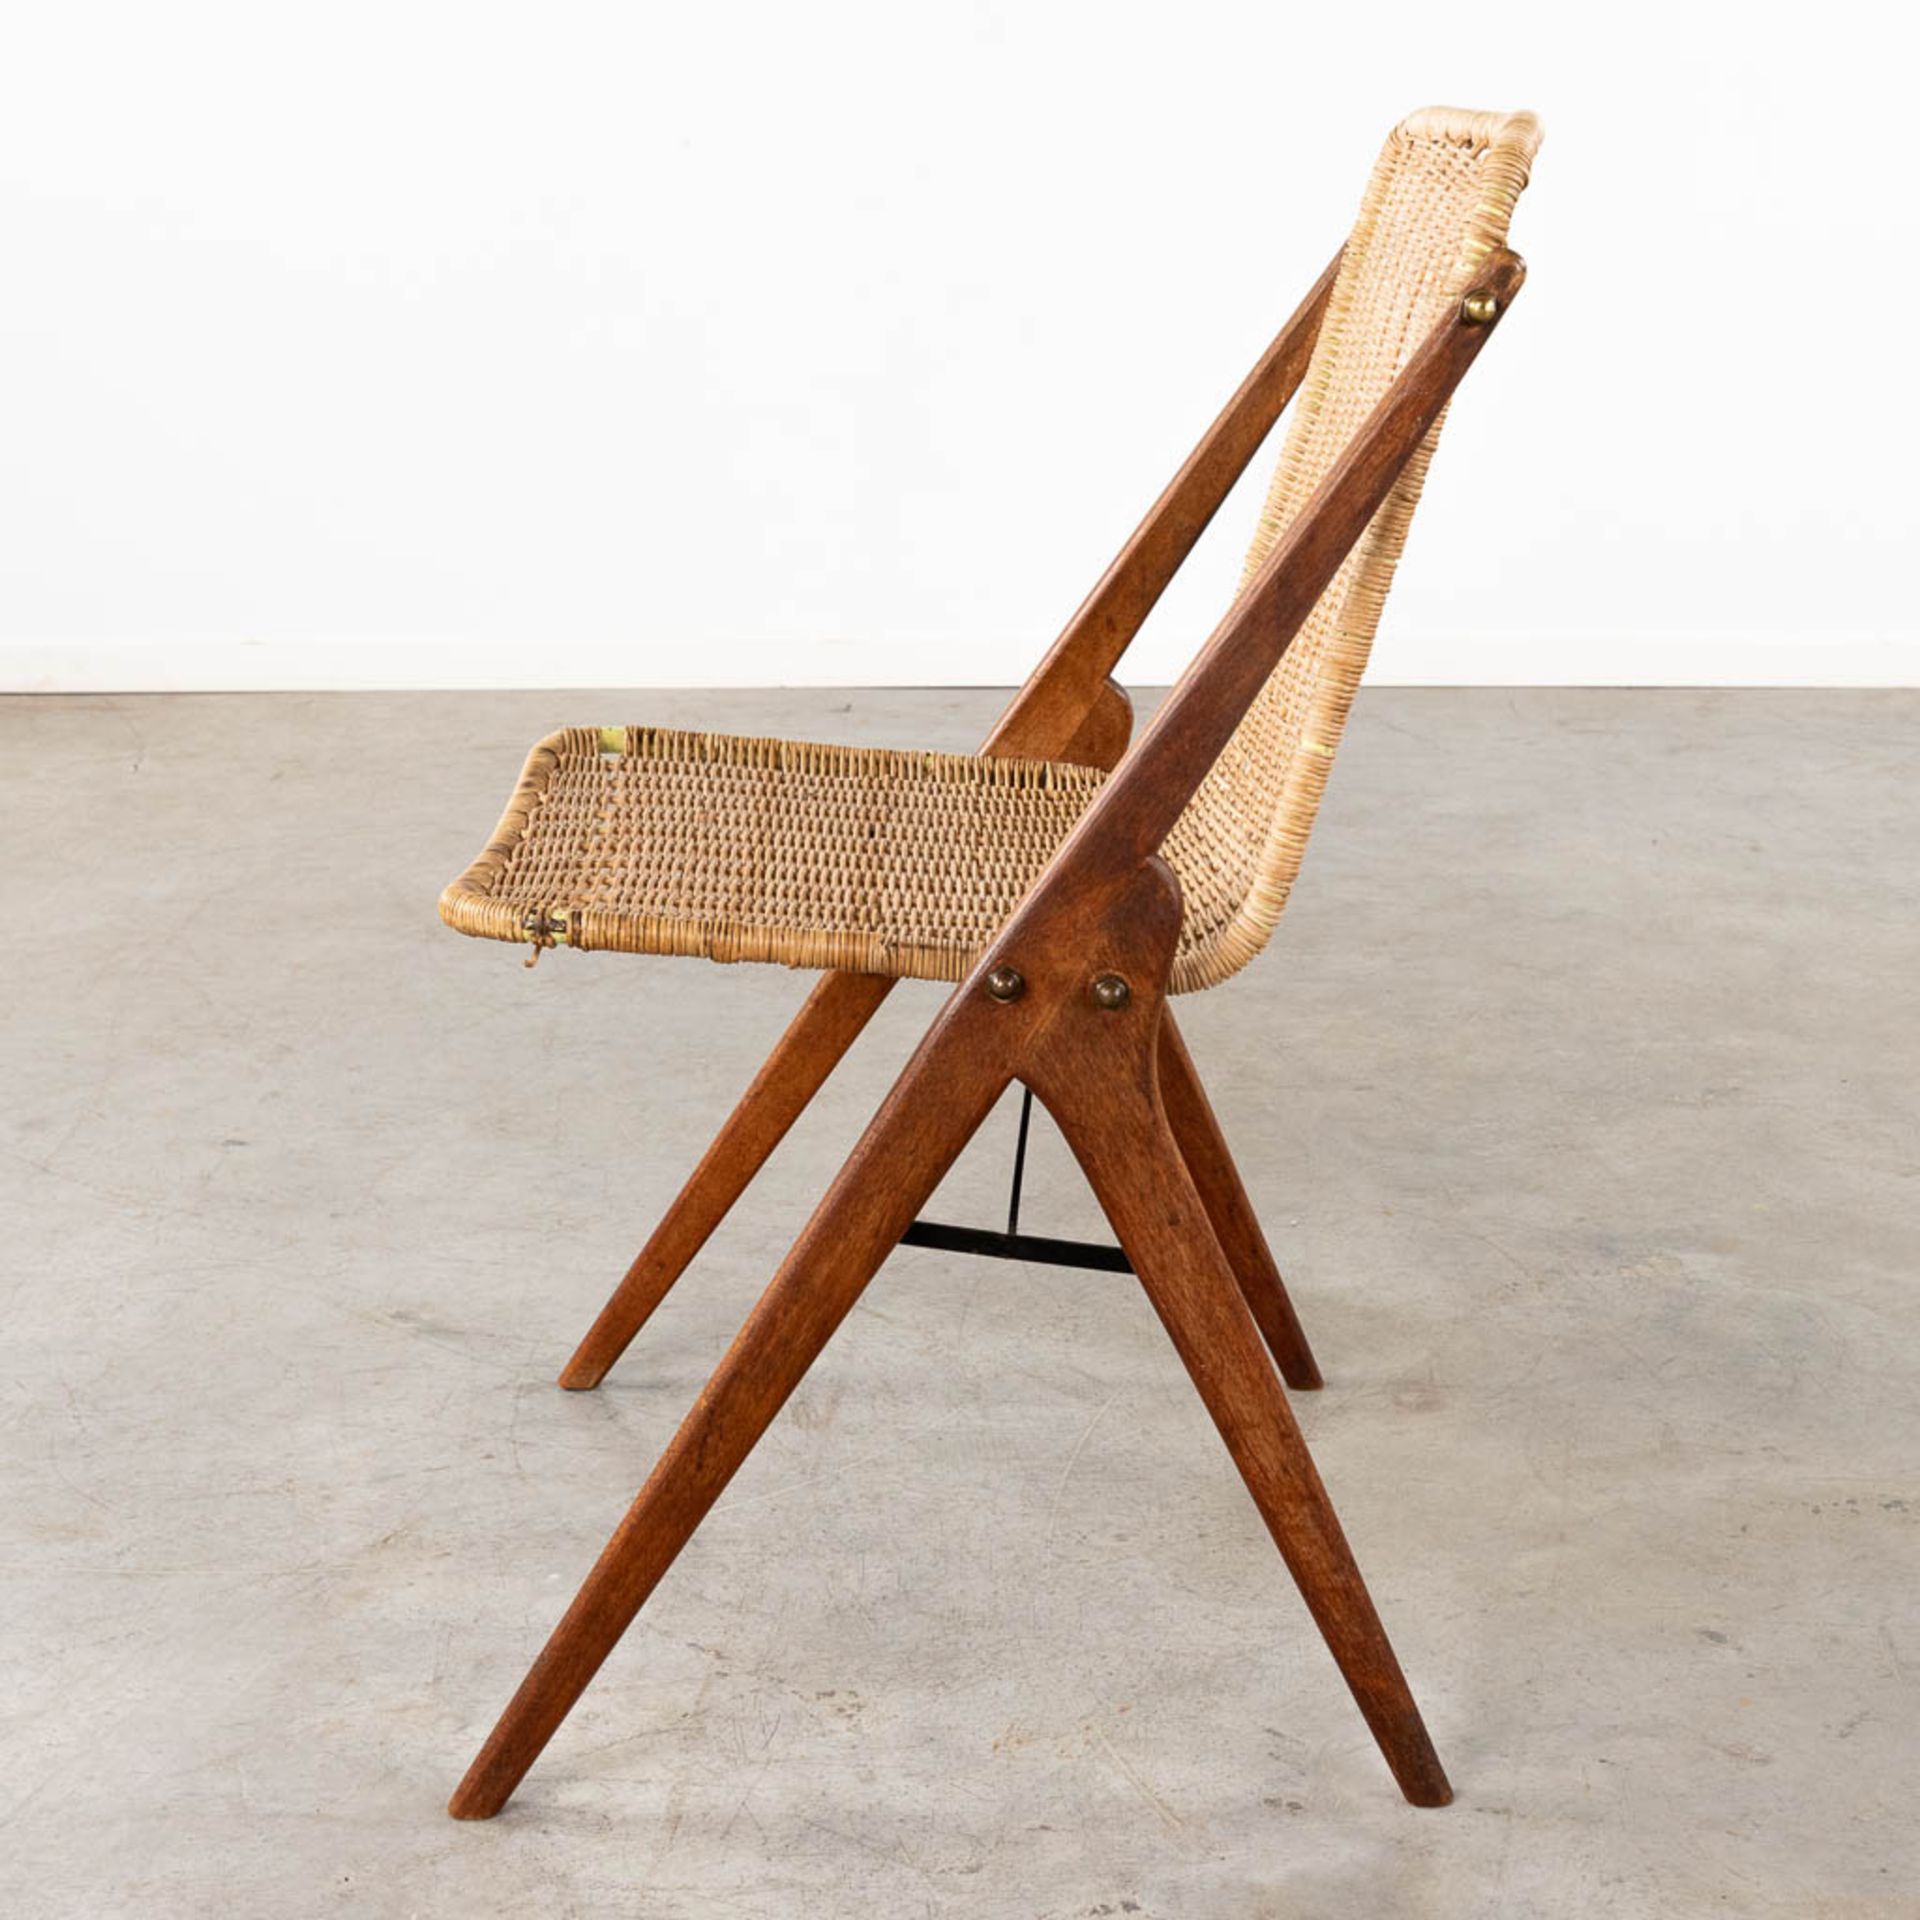 A mid-century table and 6 chairs, rotan and metal, teak wood. Circa 1960. (D:86 x W:160 x H:76 cm) - Image 28 of 31